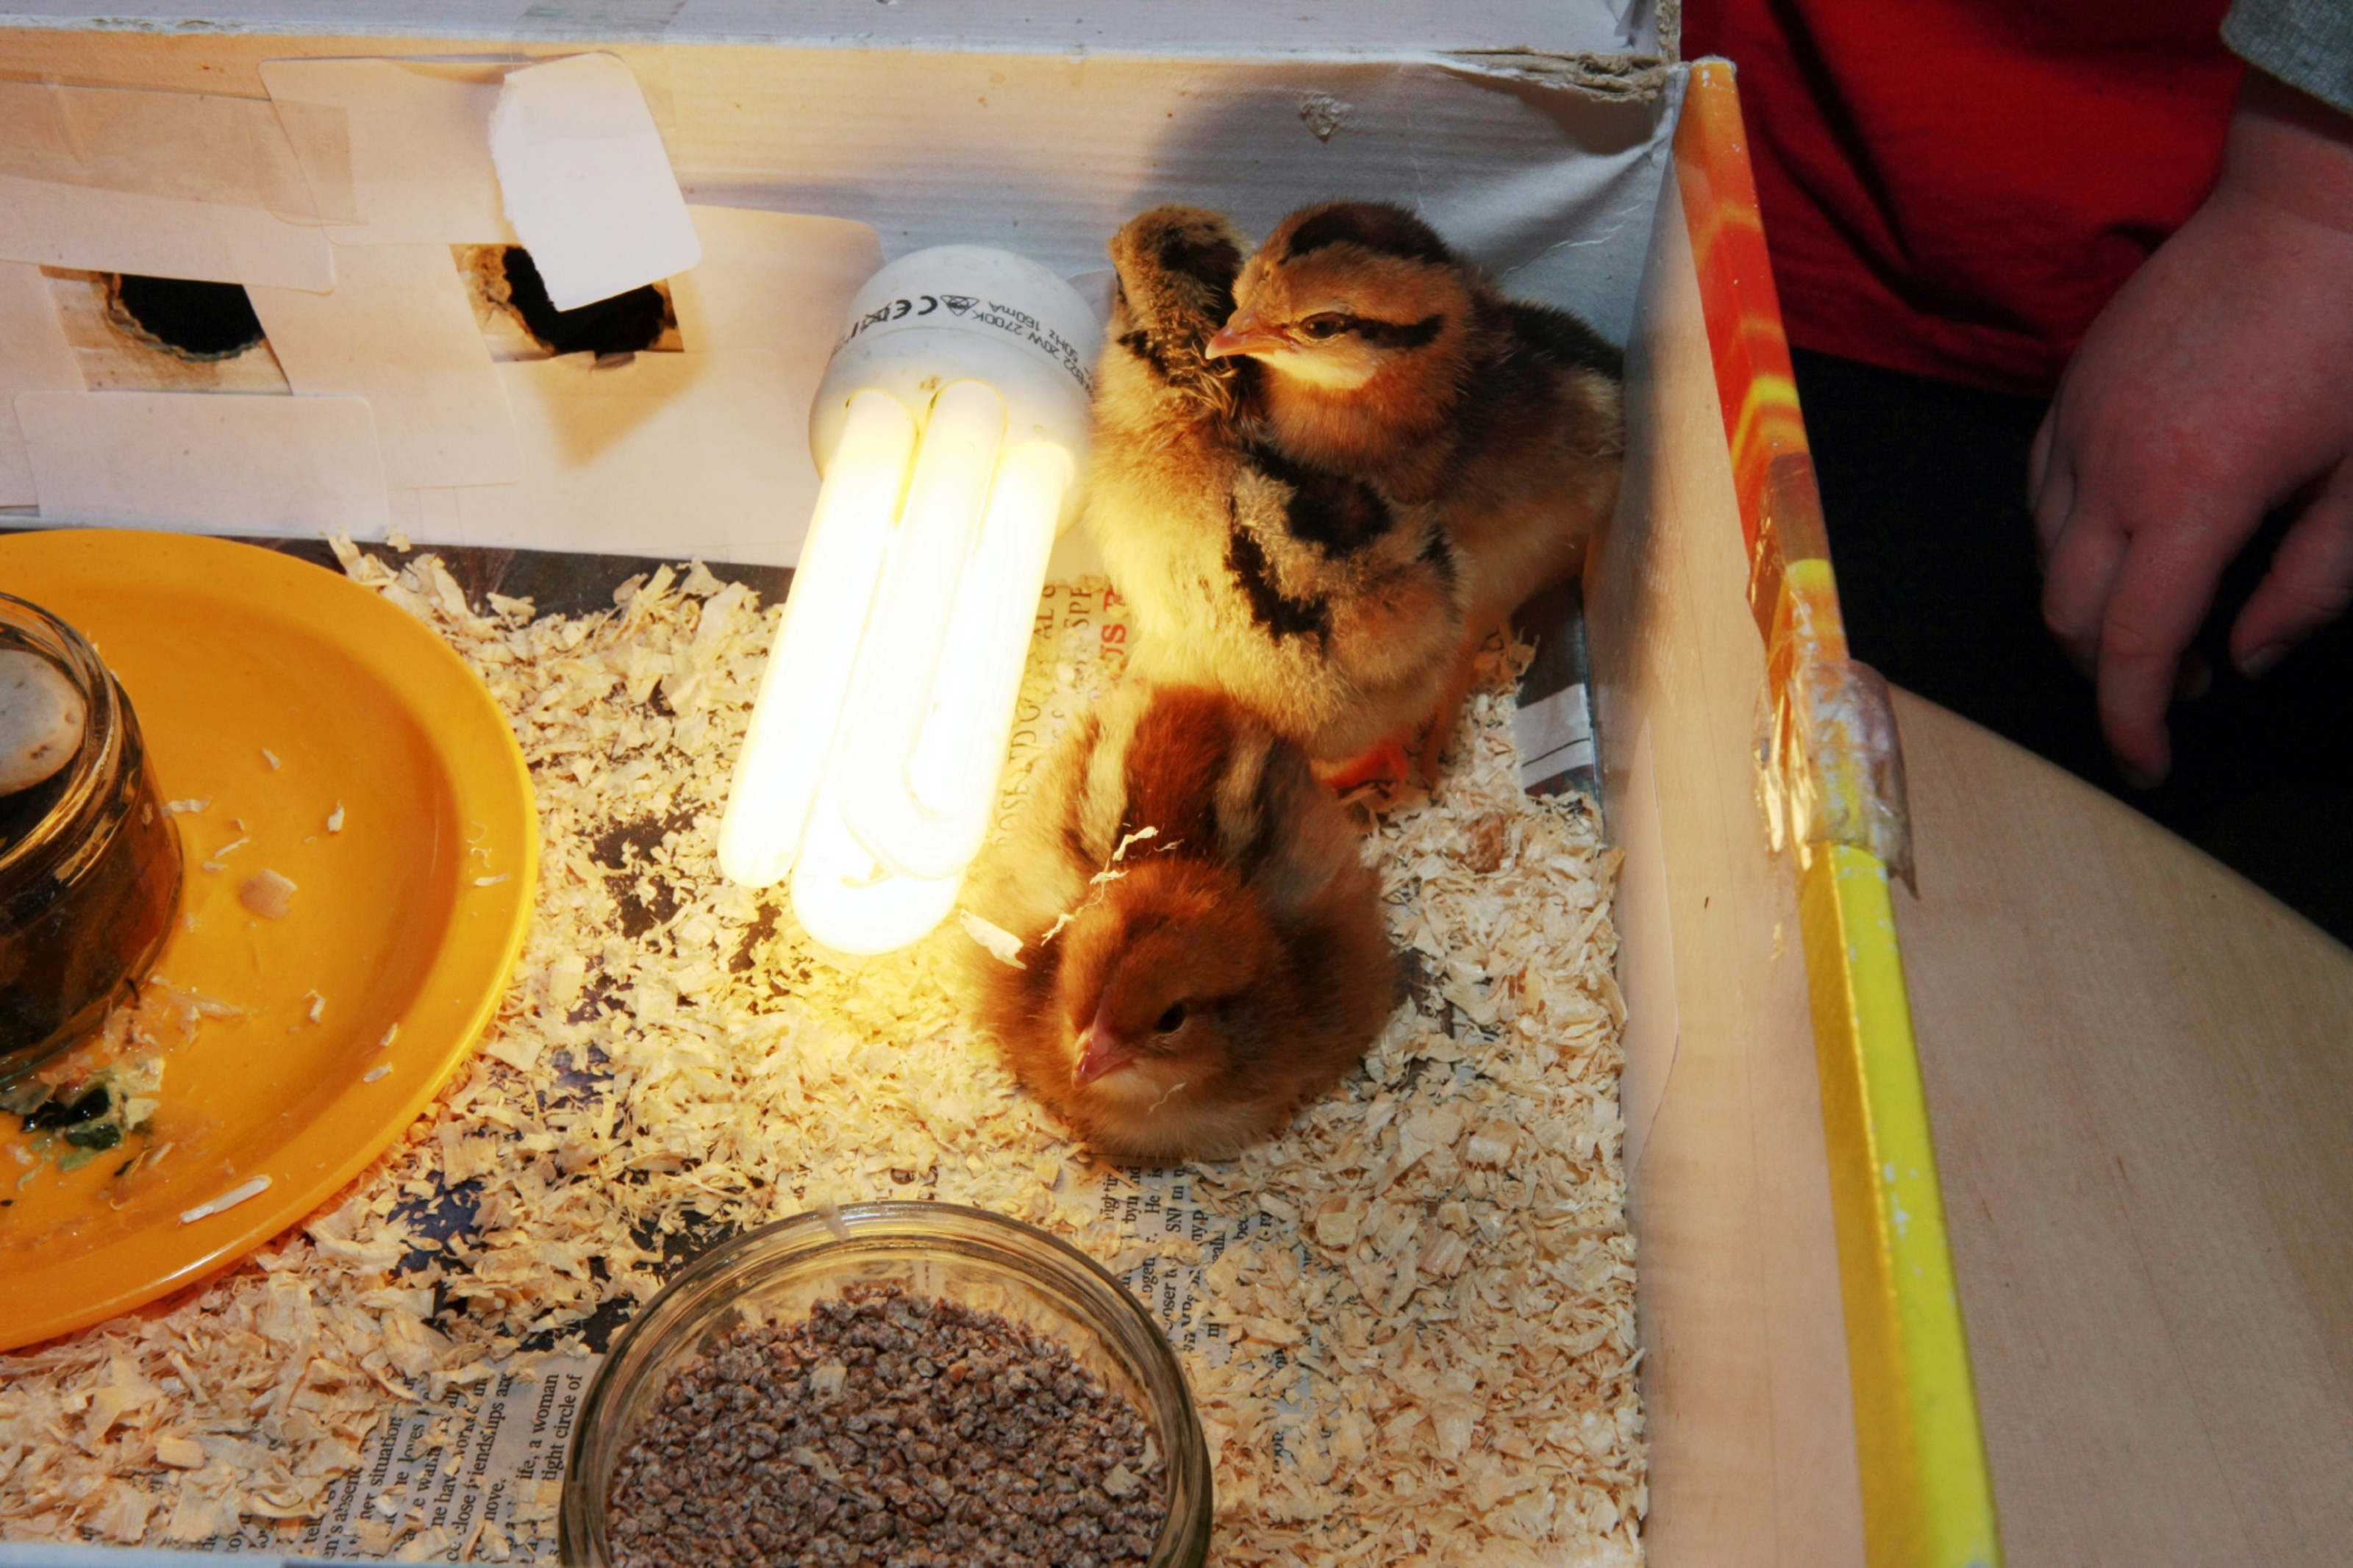 Chicks in an incubator as not seen at The Overgate.